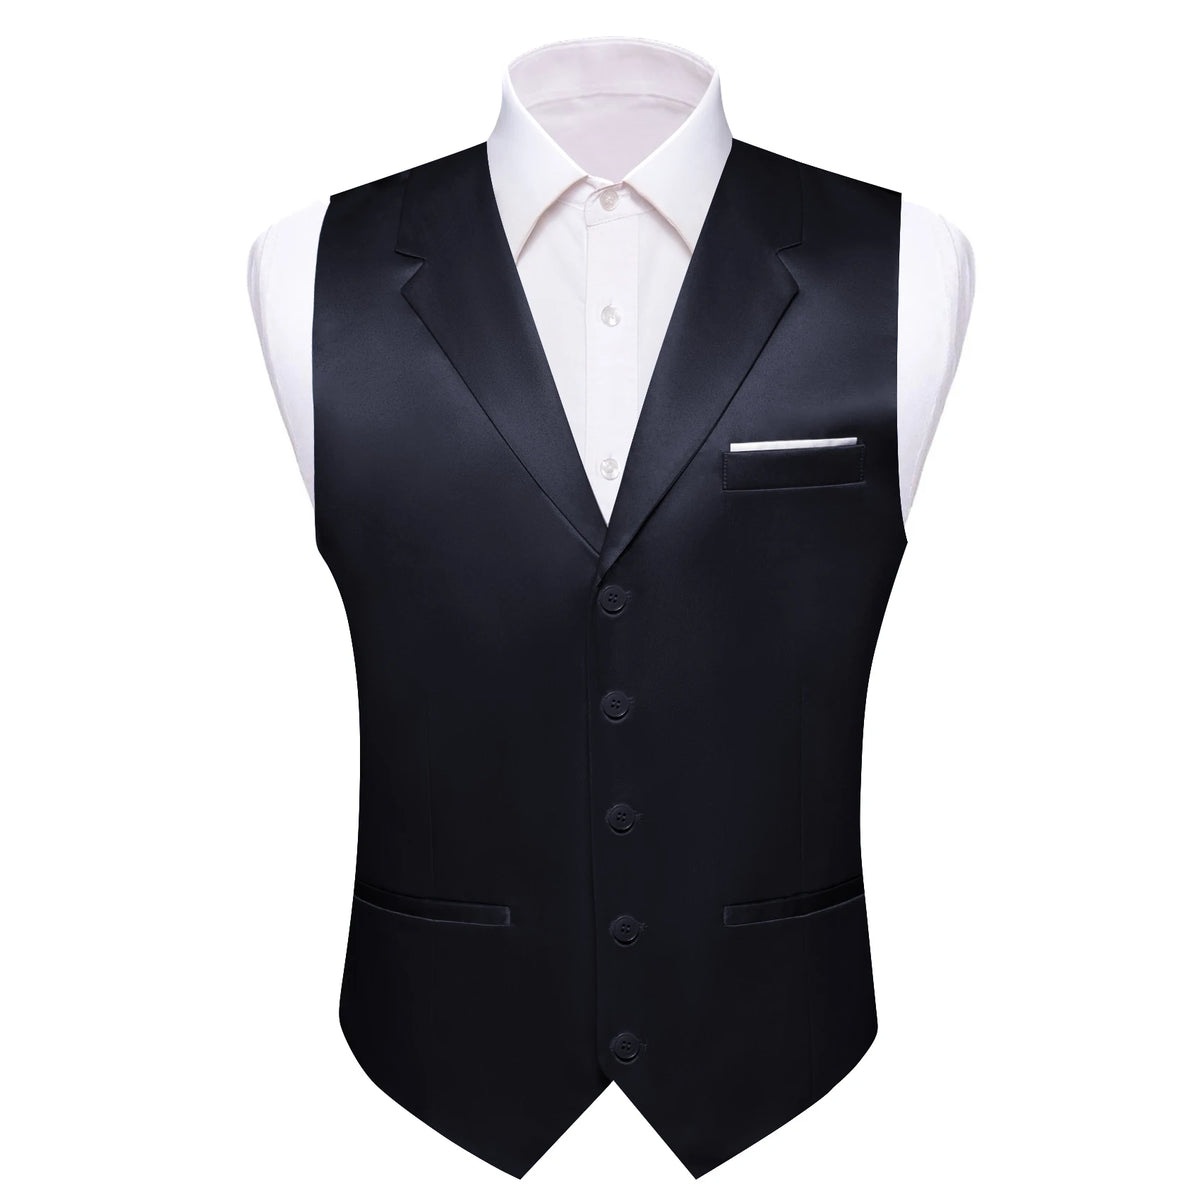 a black vest and white shirt on a mannequin